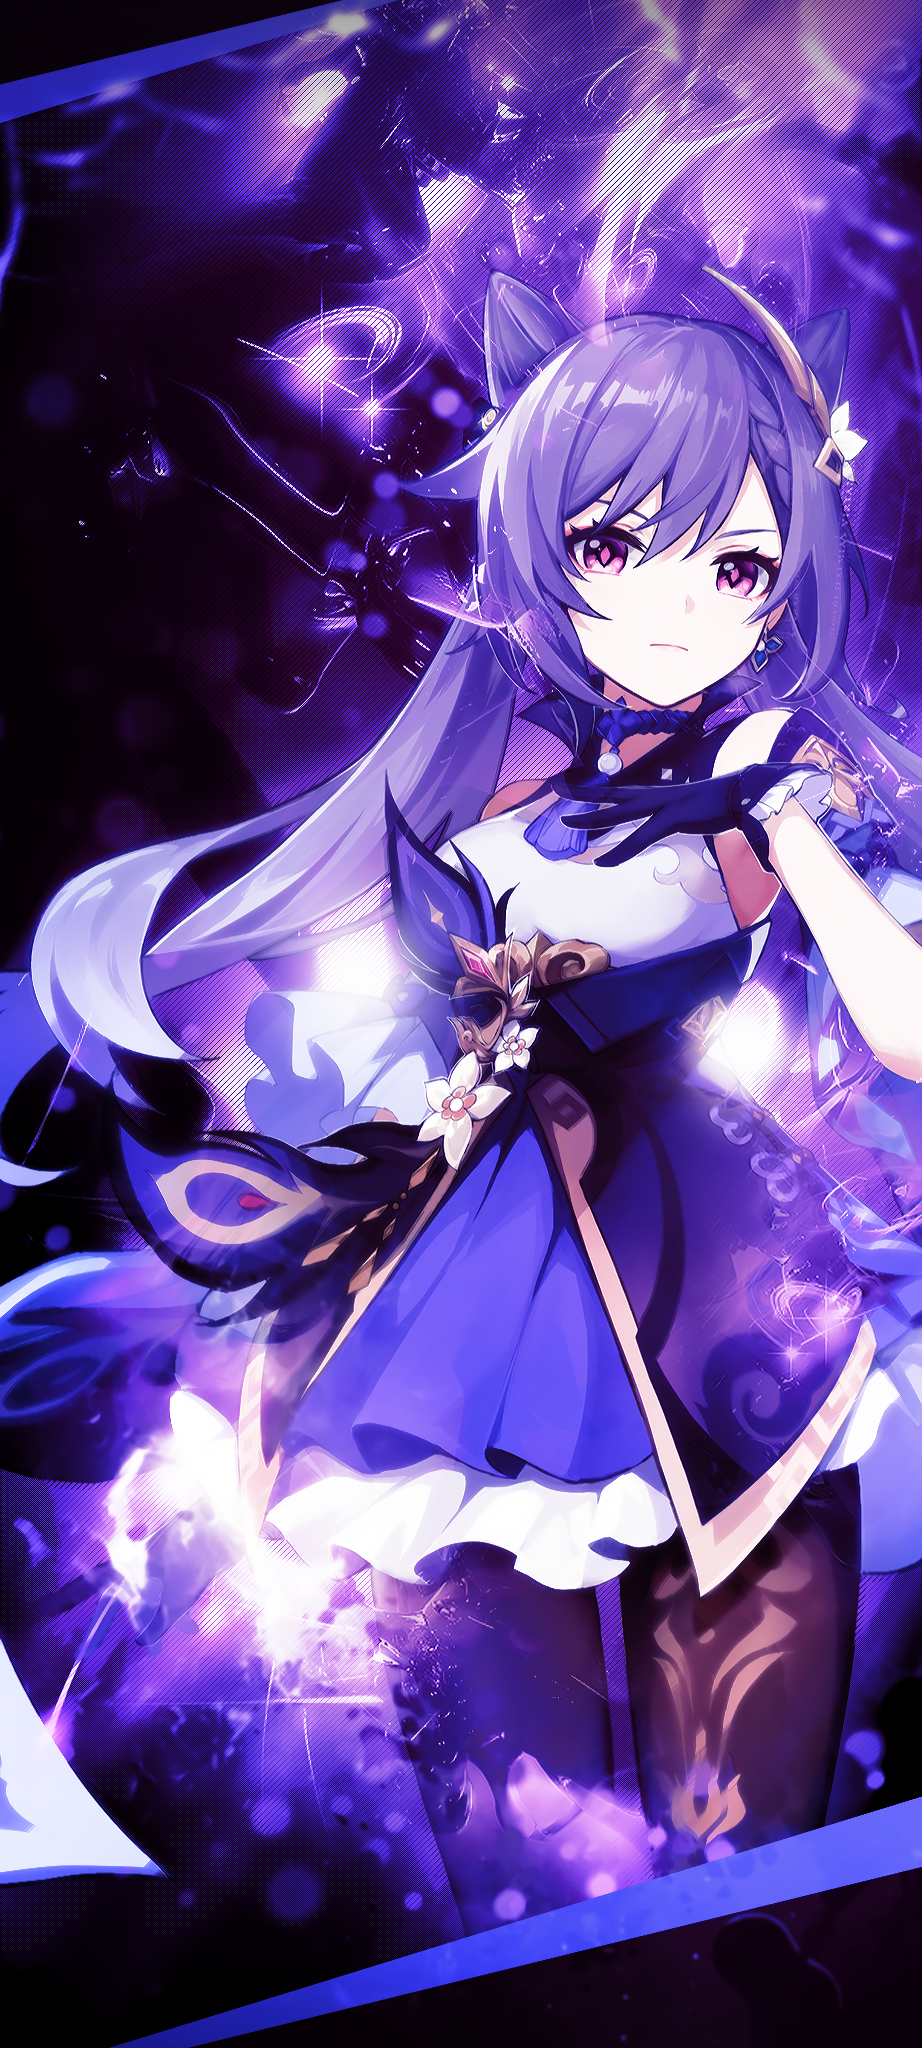 Keqing Background for mobile devices, Genshin_Impact